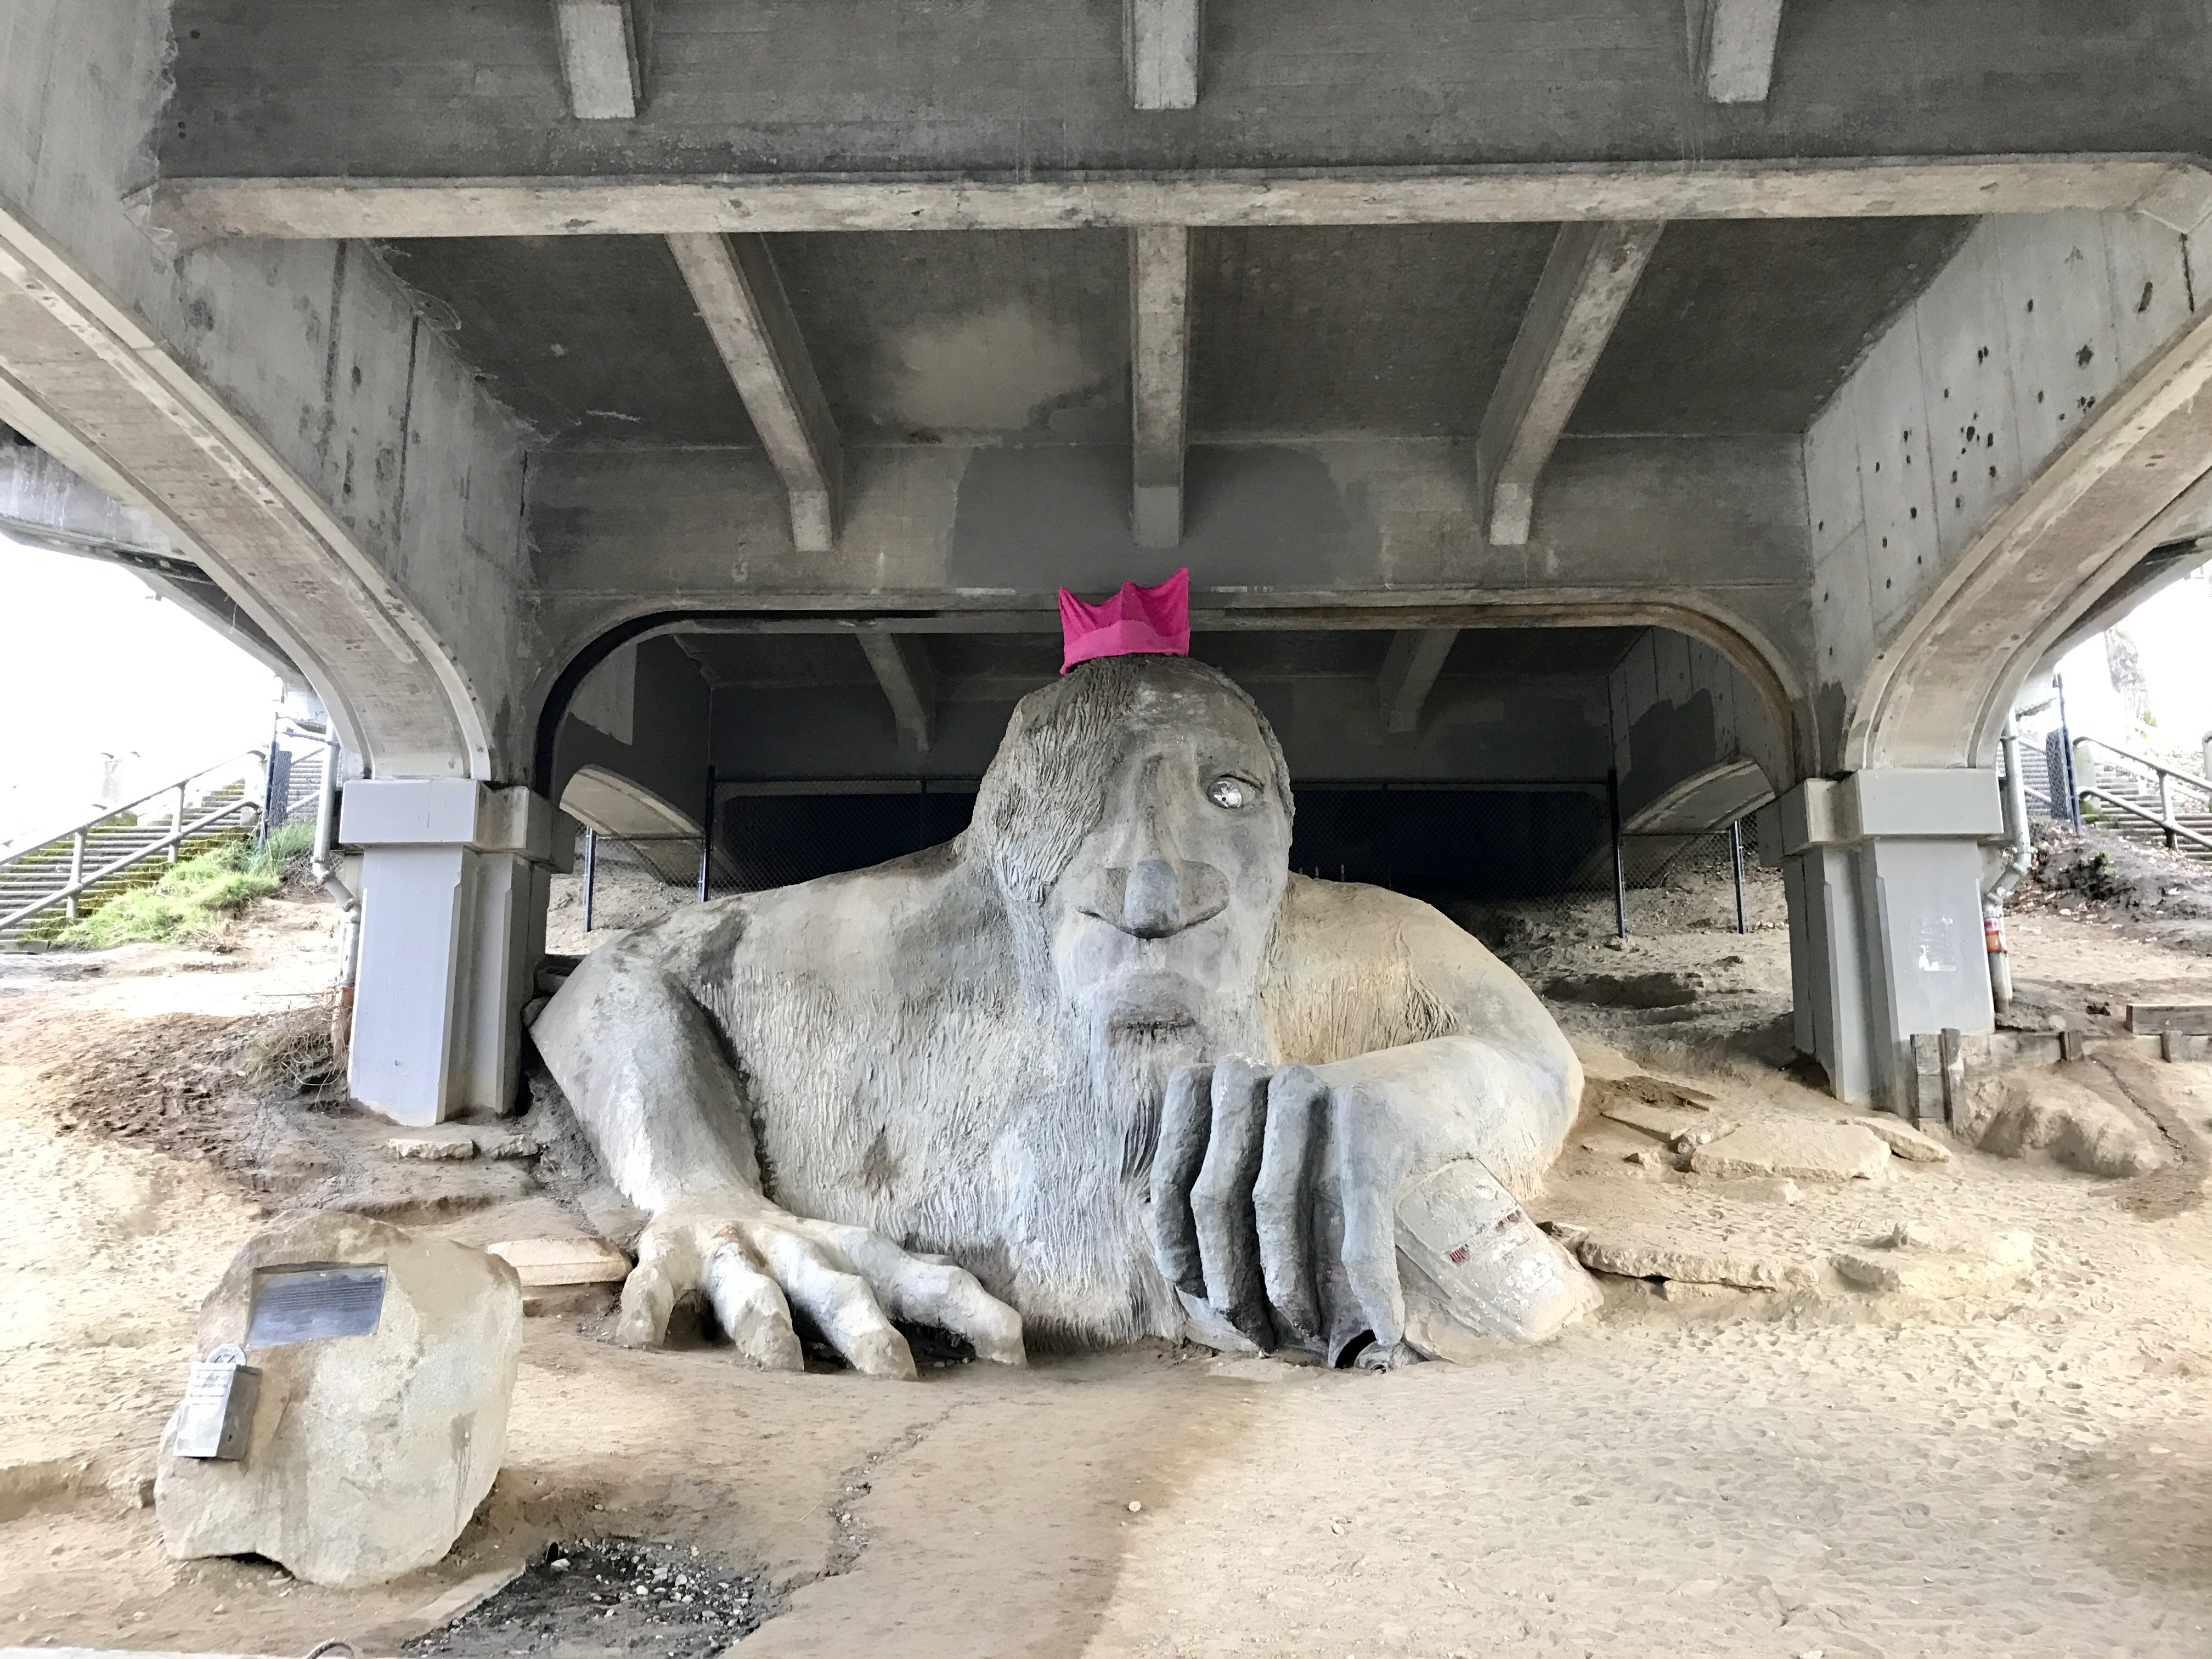 I'm proud of America today. Even the Fremont Troll is sporting a pussyhat.